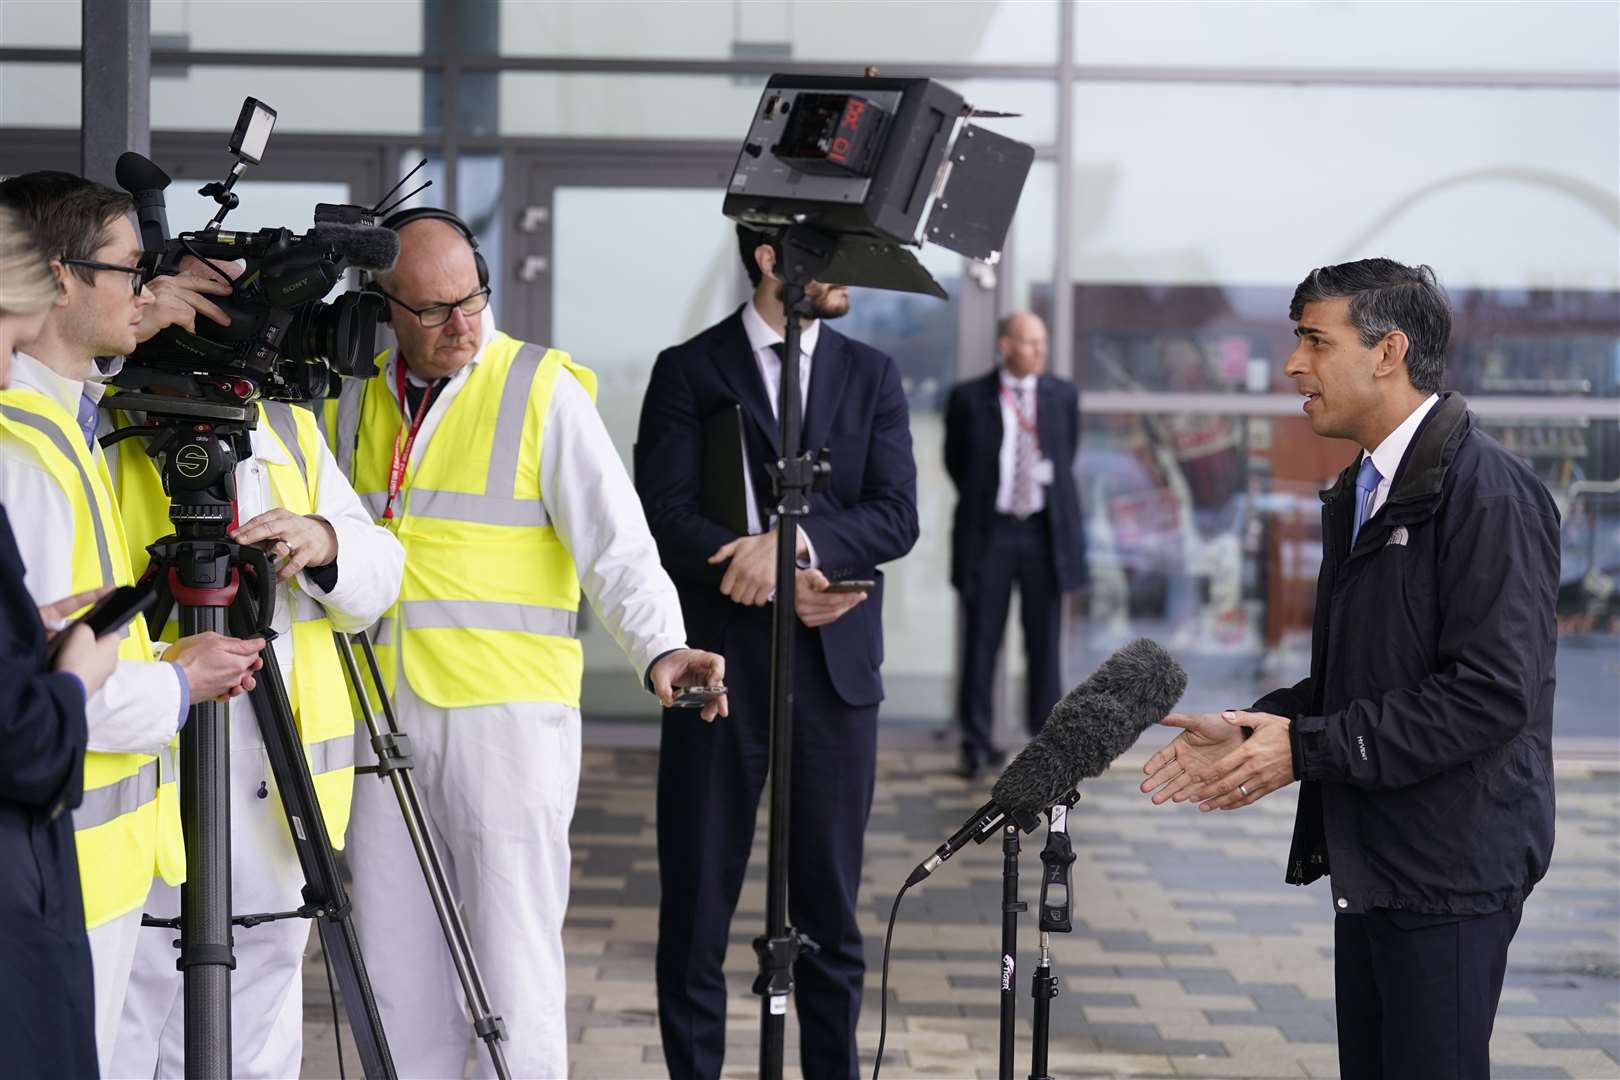 Prime Minister Rishi Sunak doing media interviews at BAE Systems Submarines (Danny Lawson/PA)